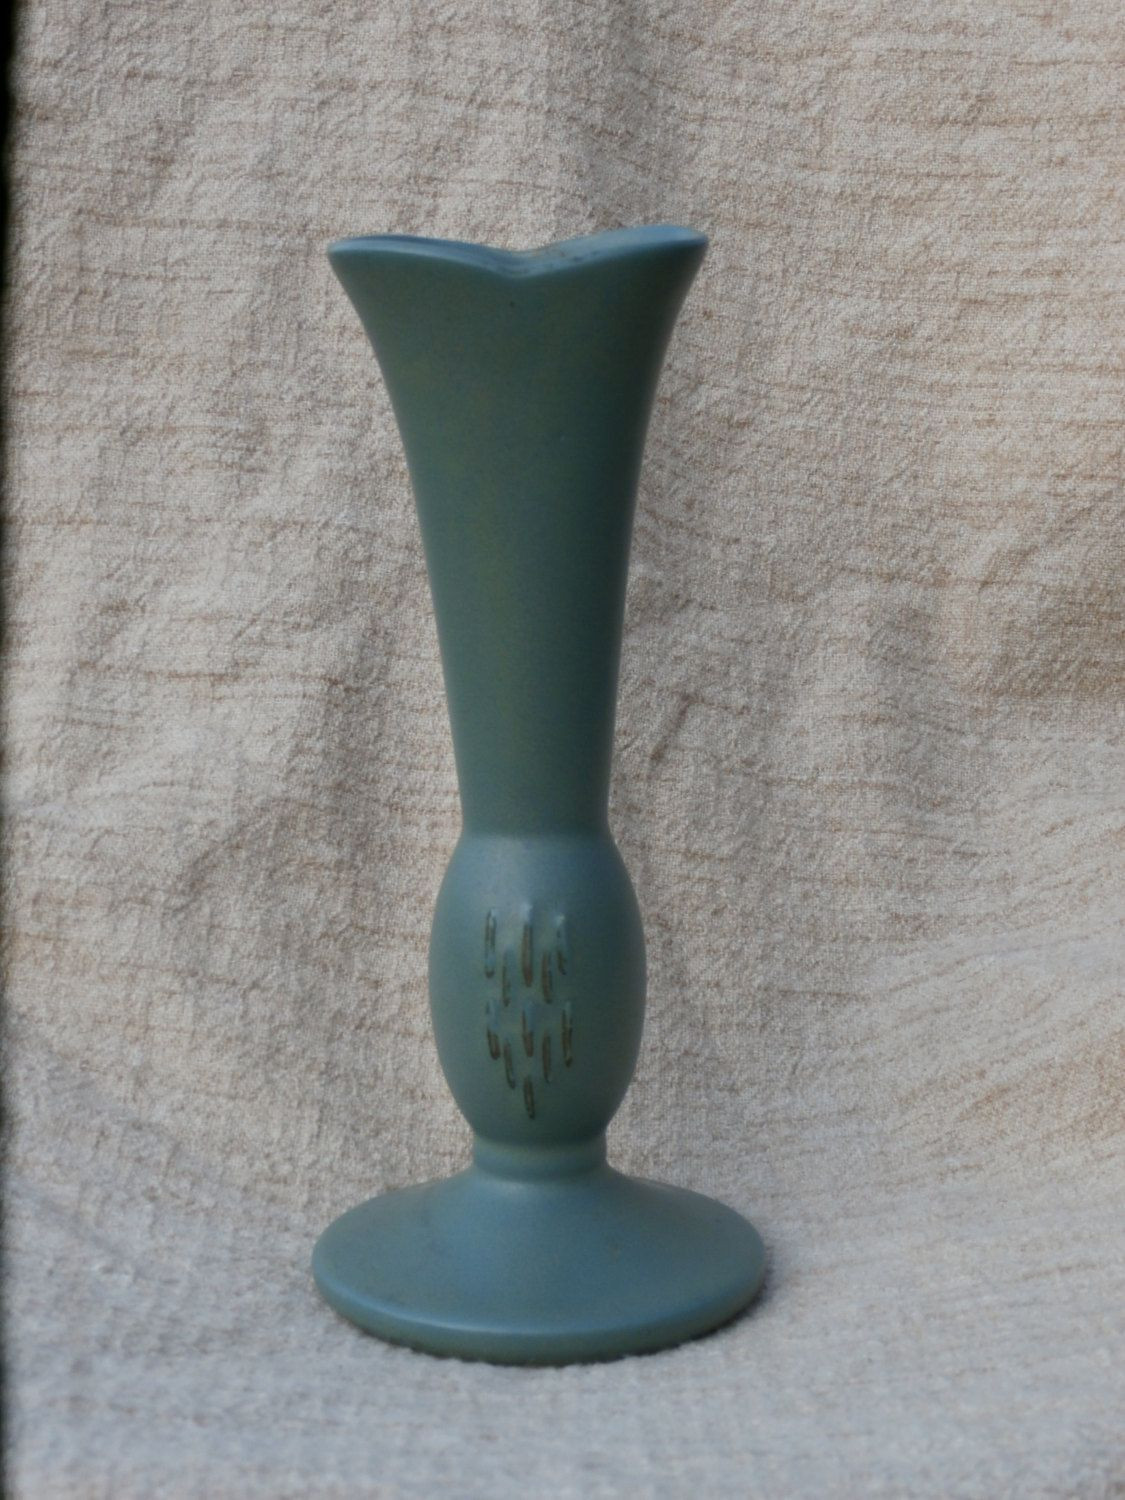 22 Recommended Iridescent Glass Vases Loetz 2022 free download iridescent glass vases loetz of vintage green vase collection sage green pottery bud vase vintage within sage green pottery bud vase vintage unknown to me by